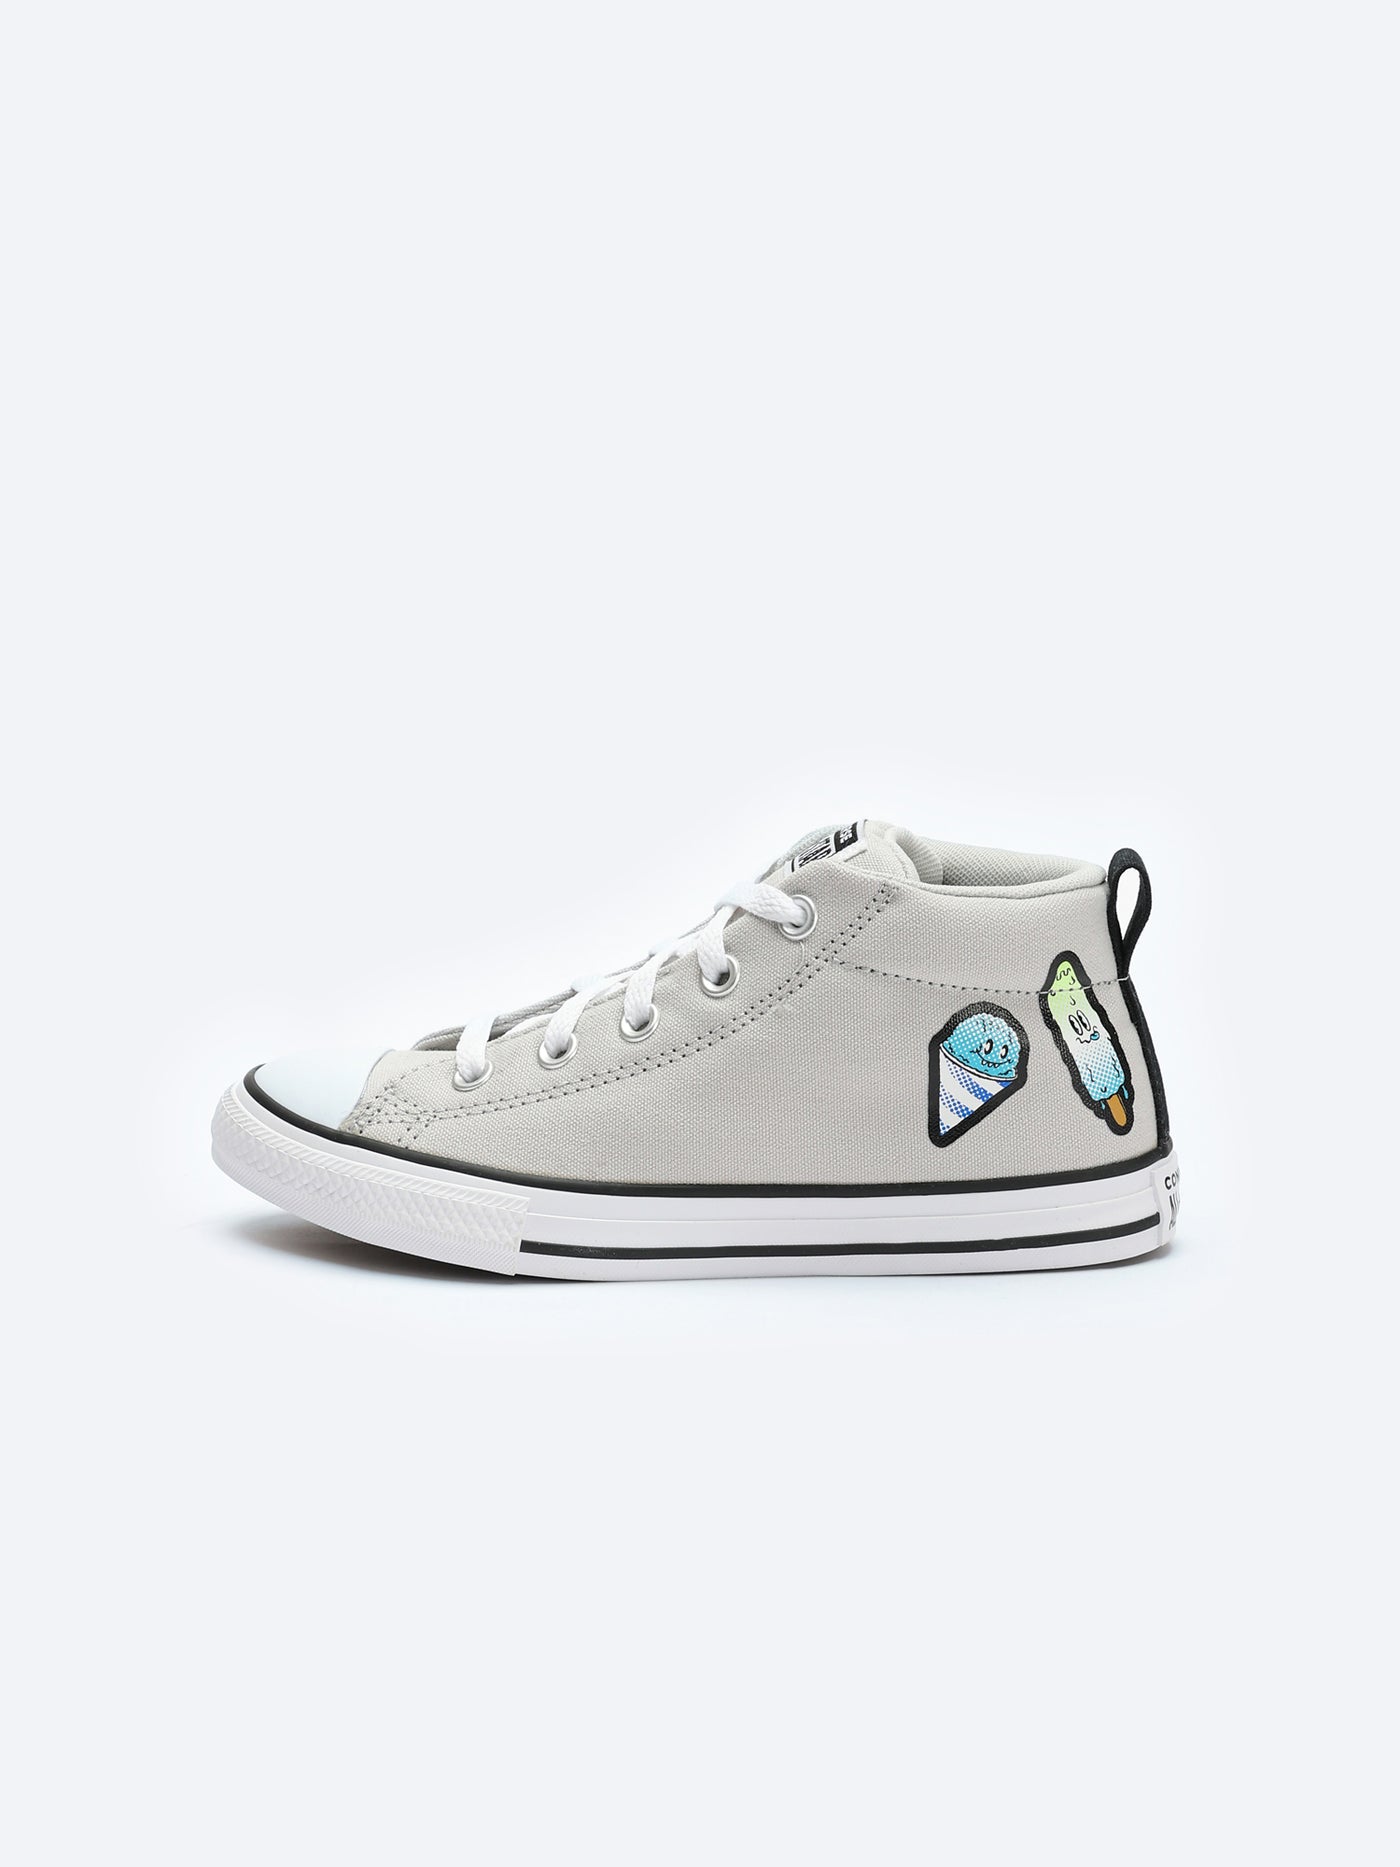 Converse Kids Boys Ankle Length Sneakers